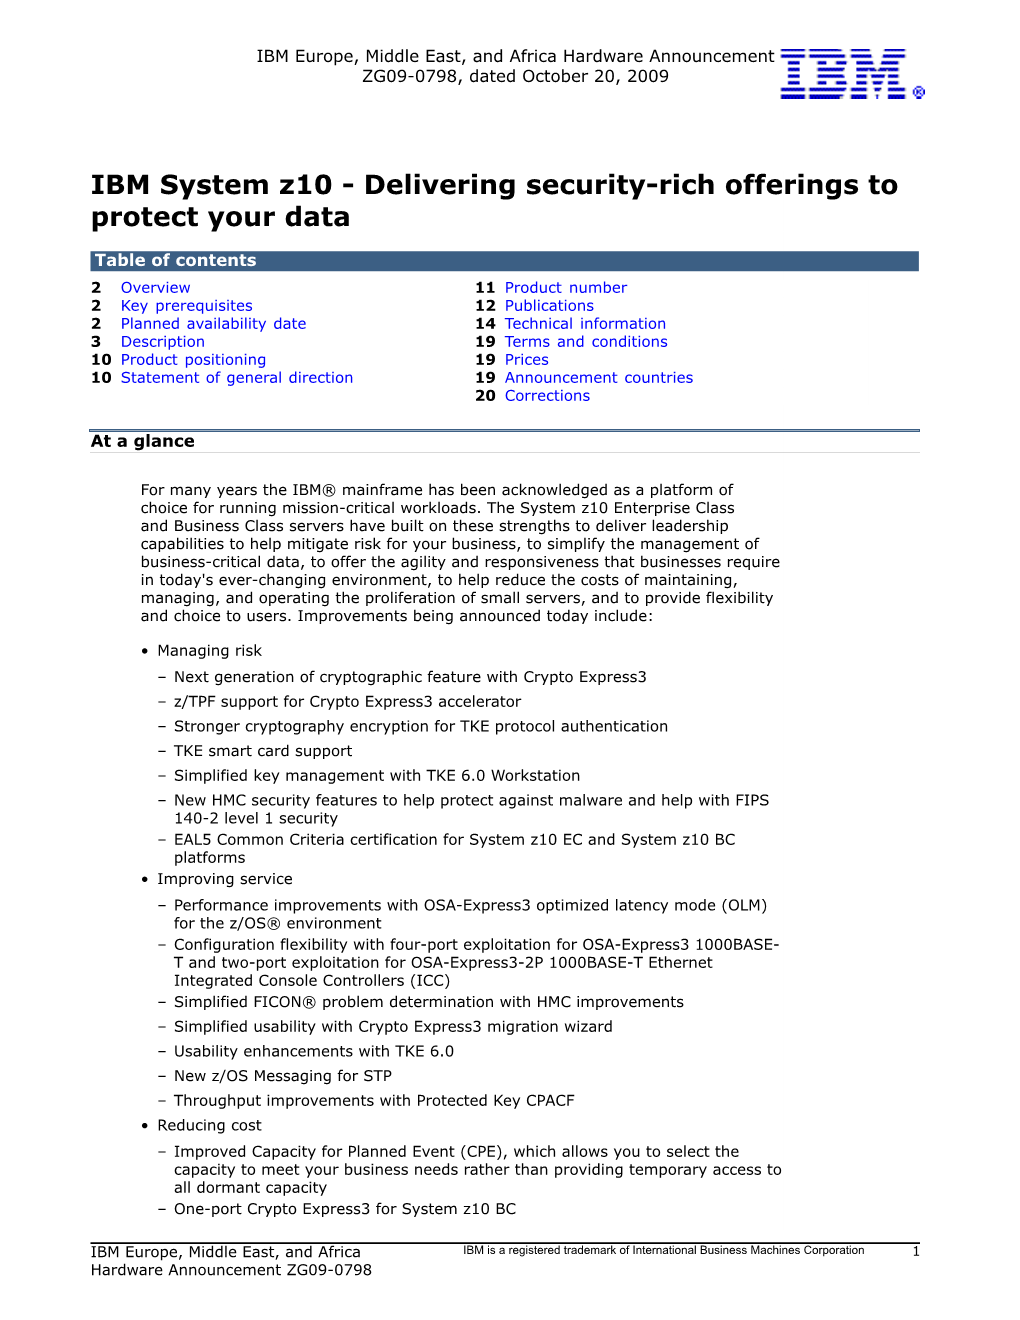 IBM System Z10 - Delivering Security-Rich Offerings to Protect Your Data